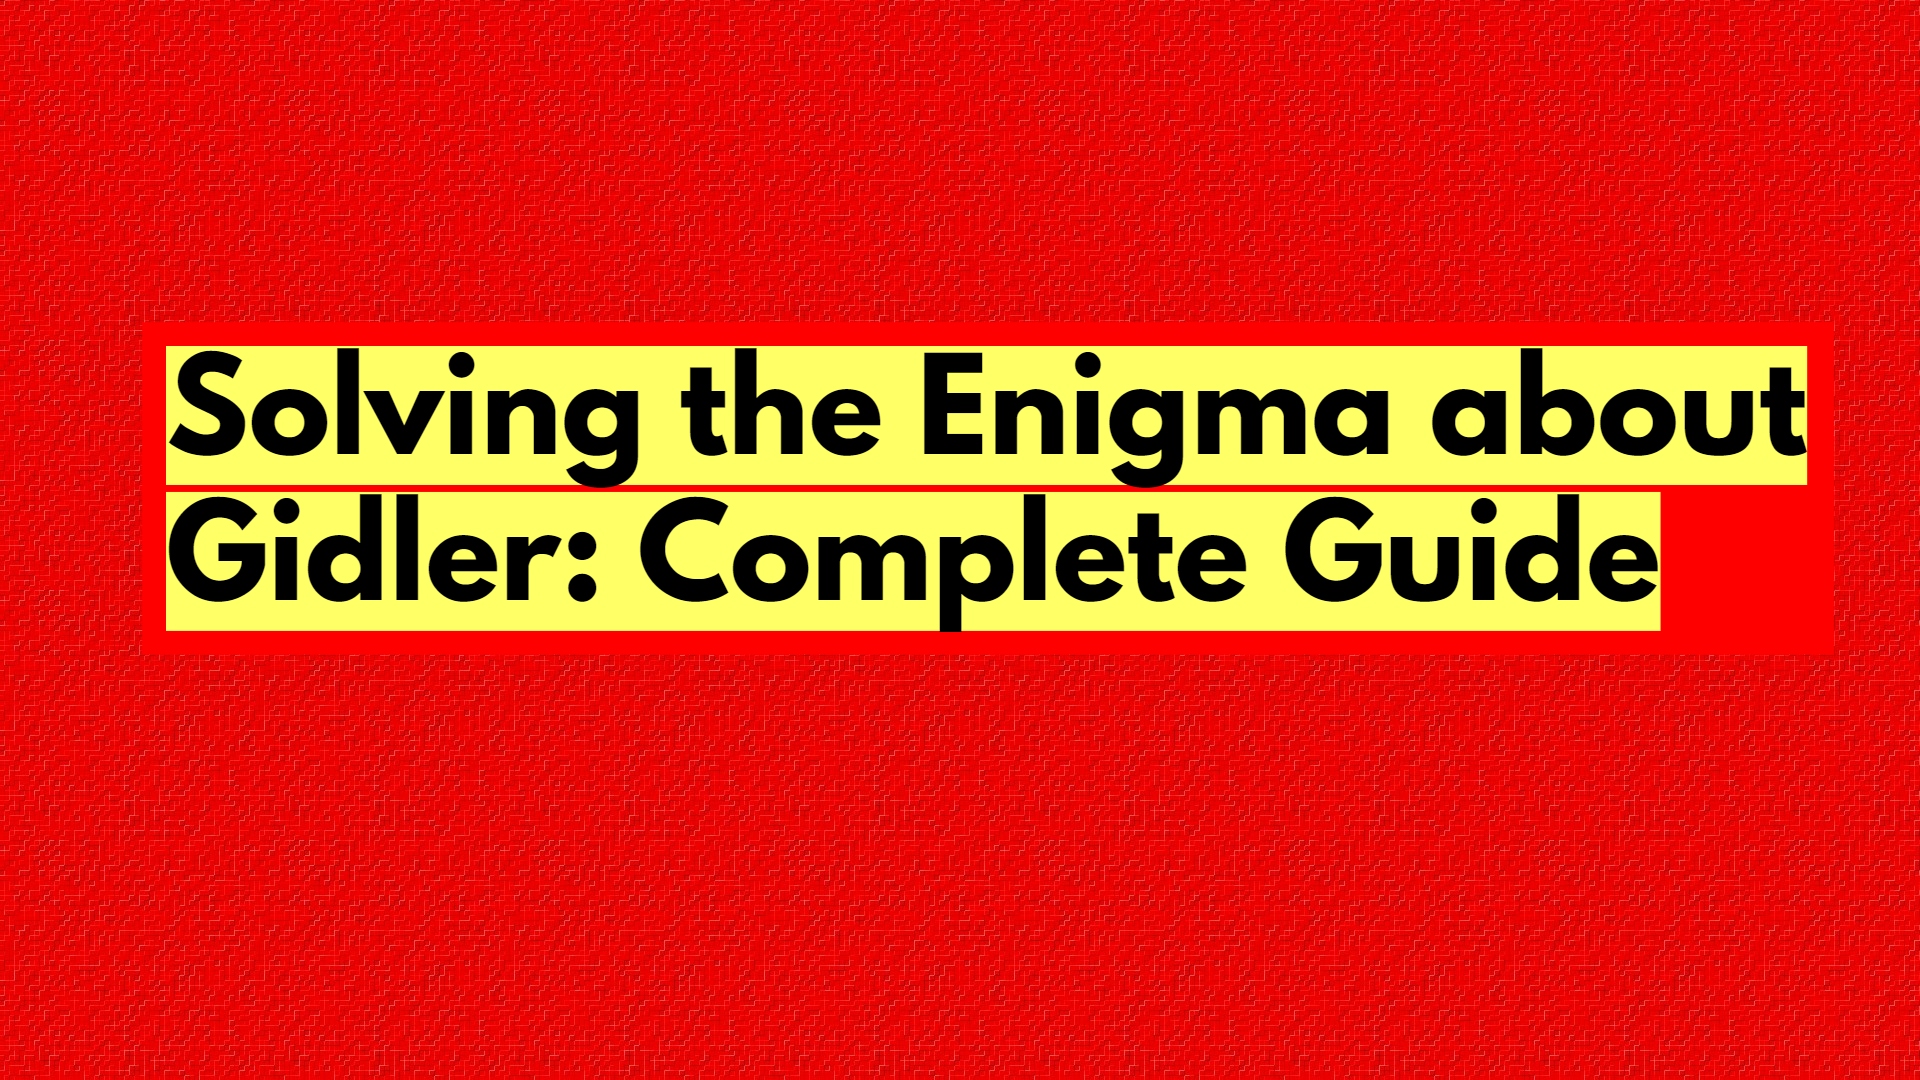 Solving the Enigma about Gidler: Complete Guide